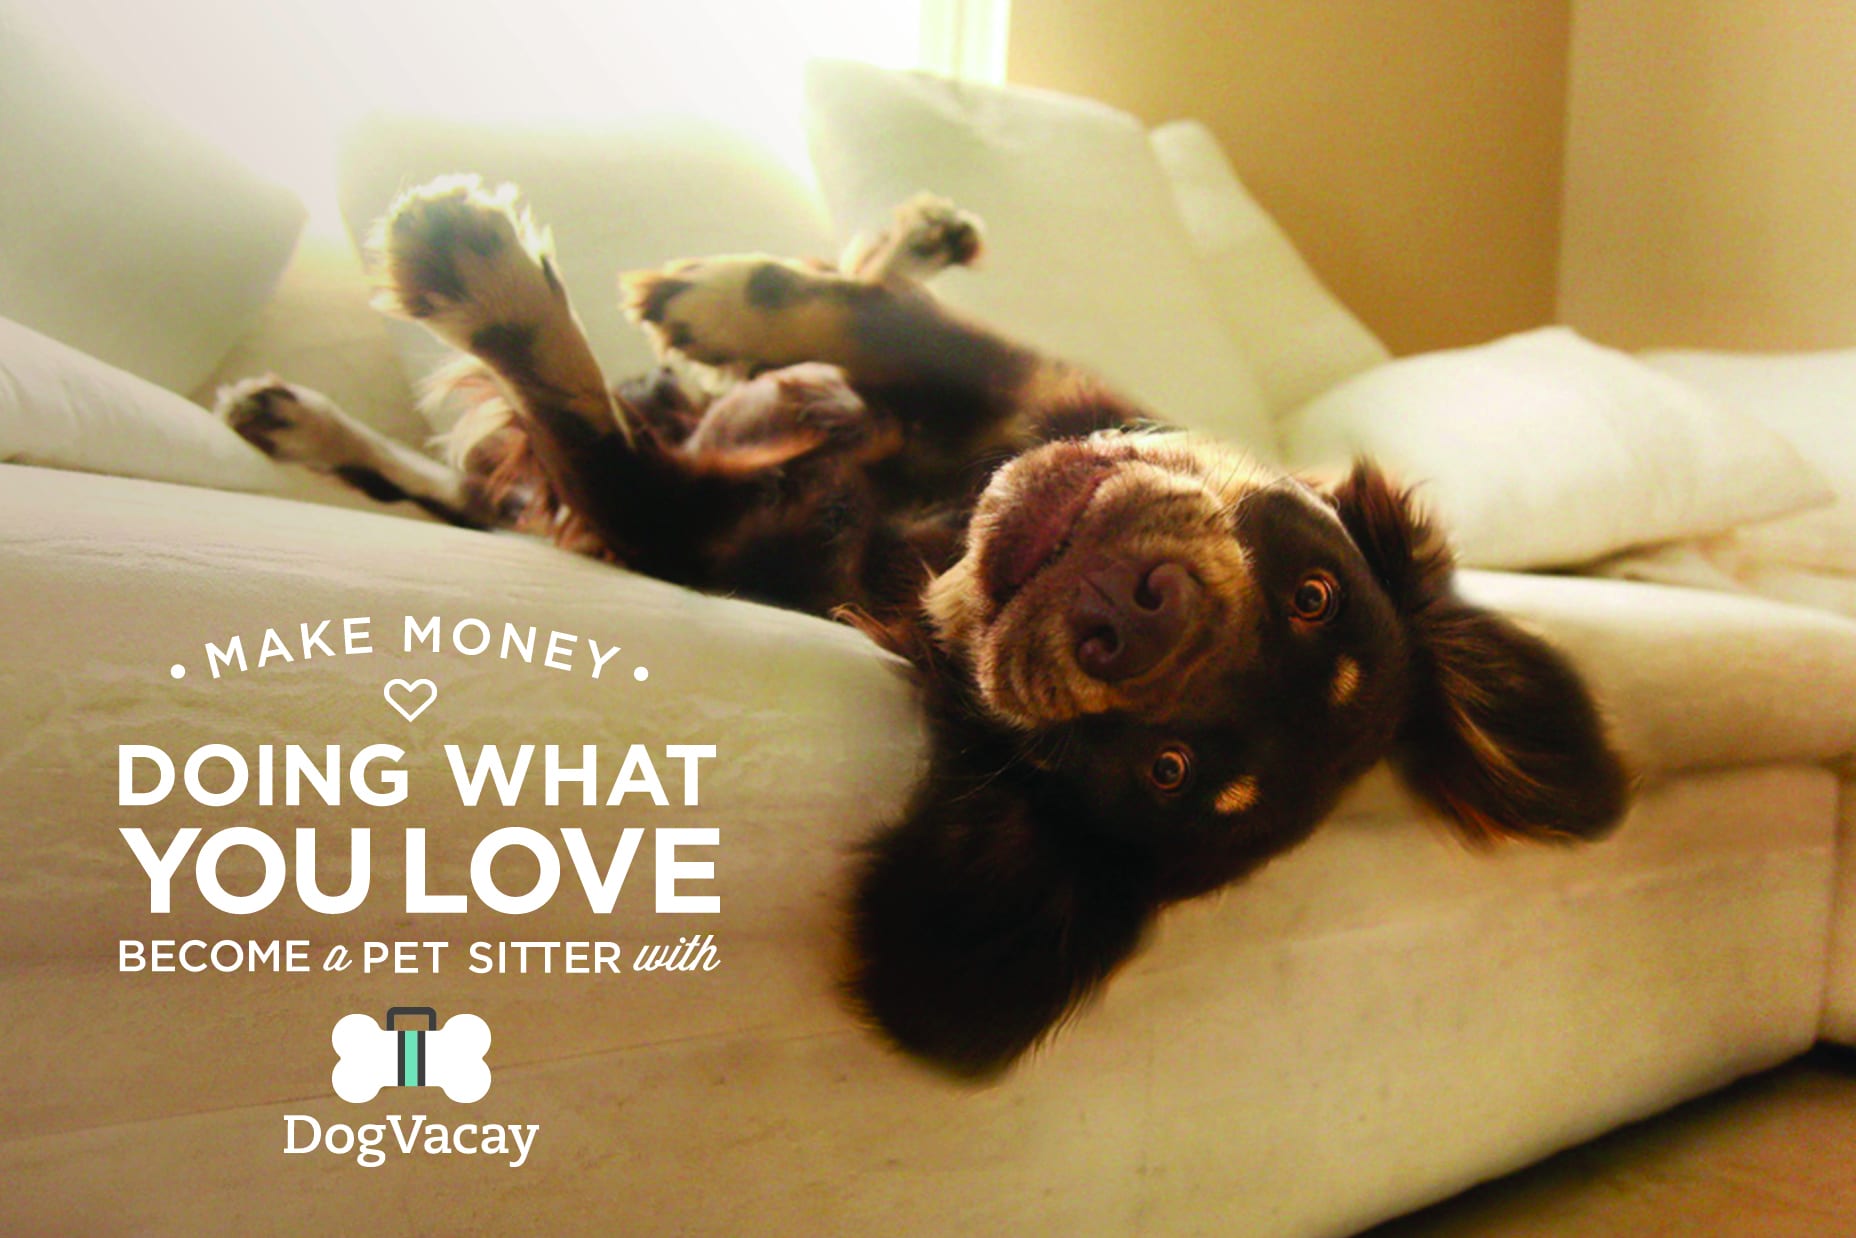 Dog Vacay – Online Dog Sitter Service – $10 Off Coupon Code + Sign up to Earn Extra Money!